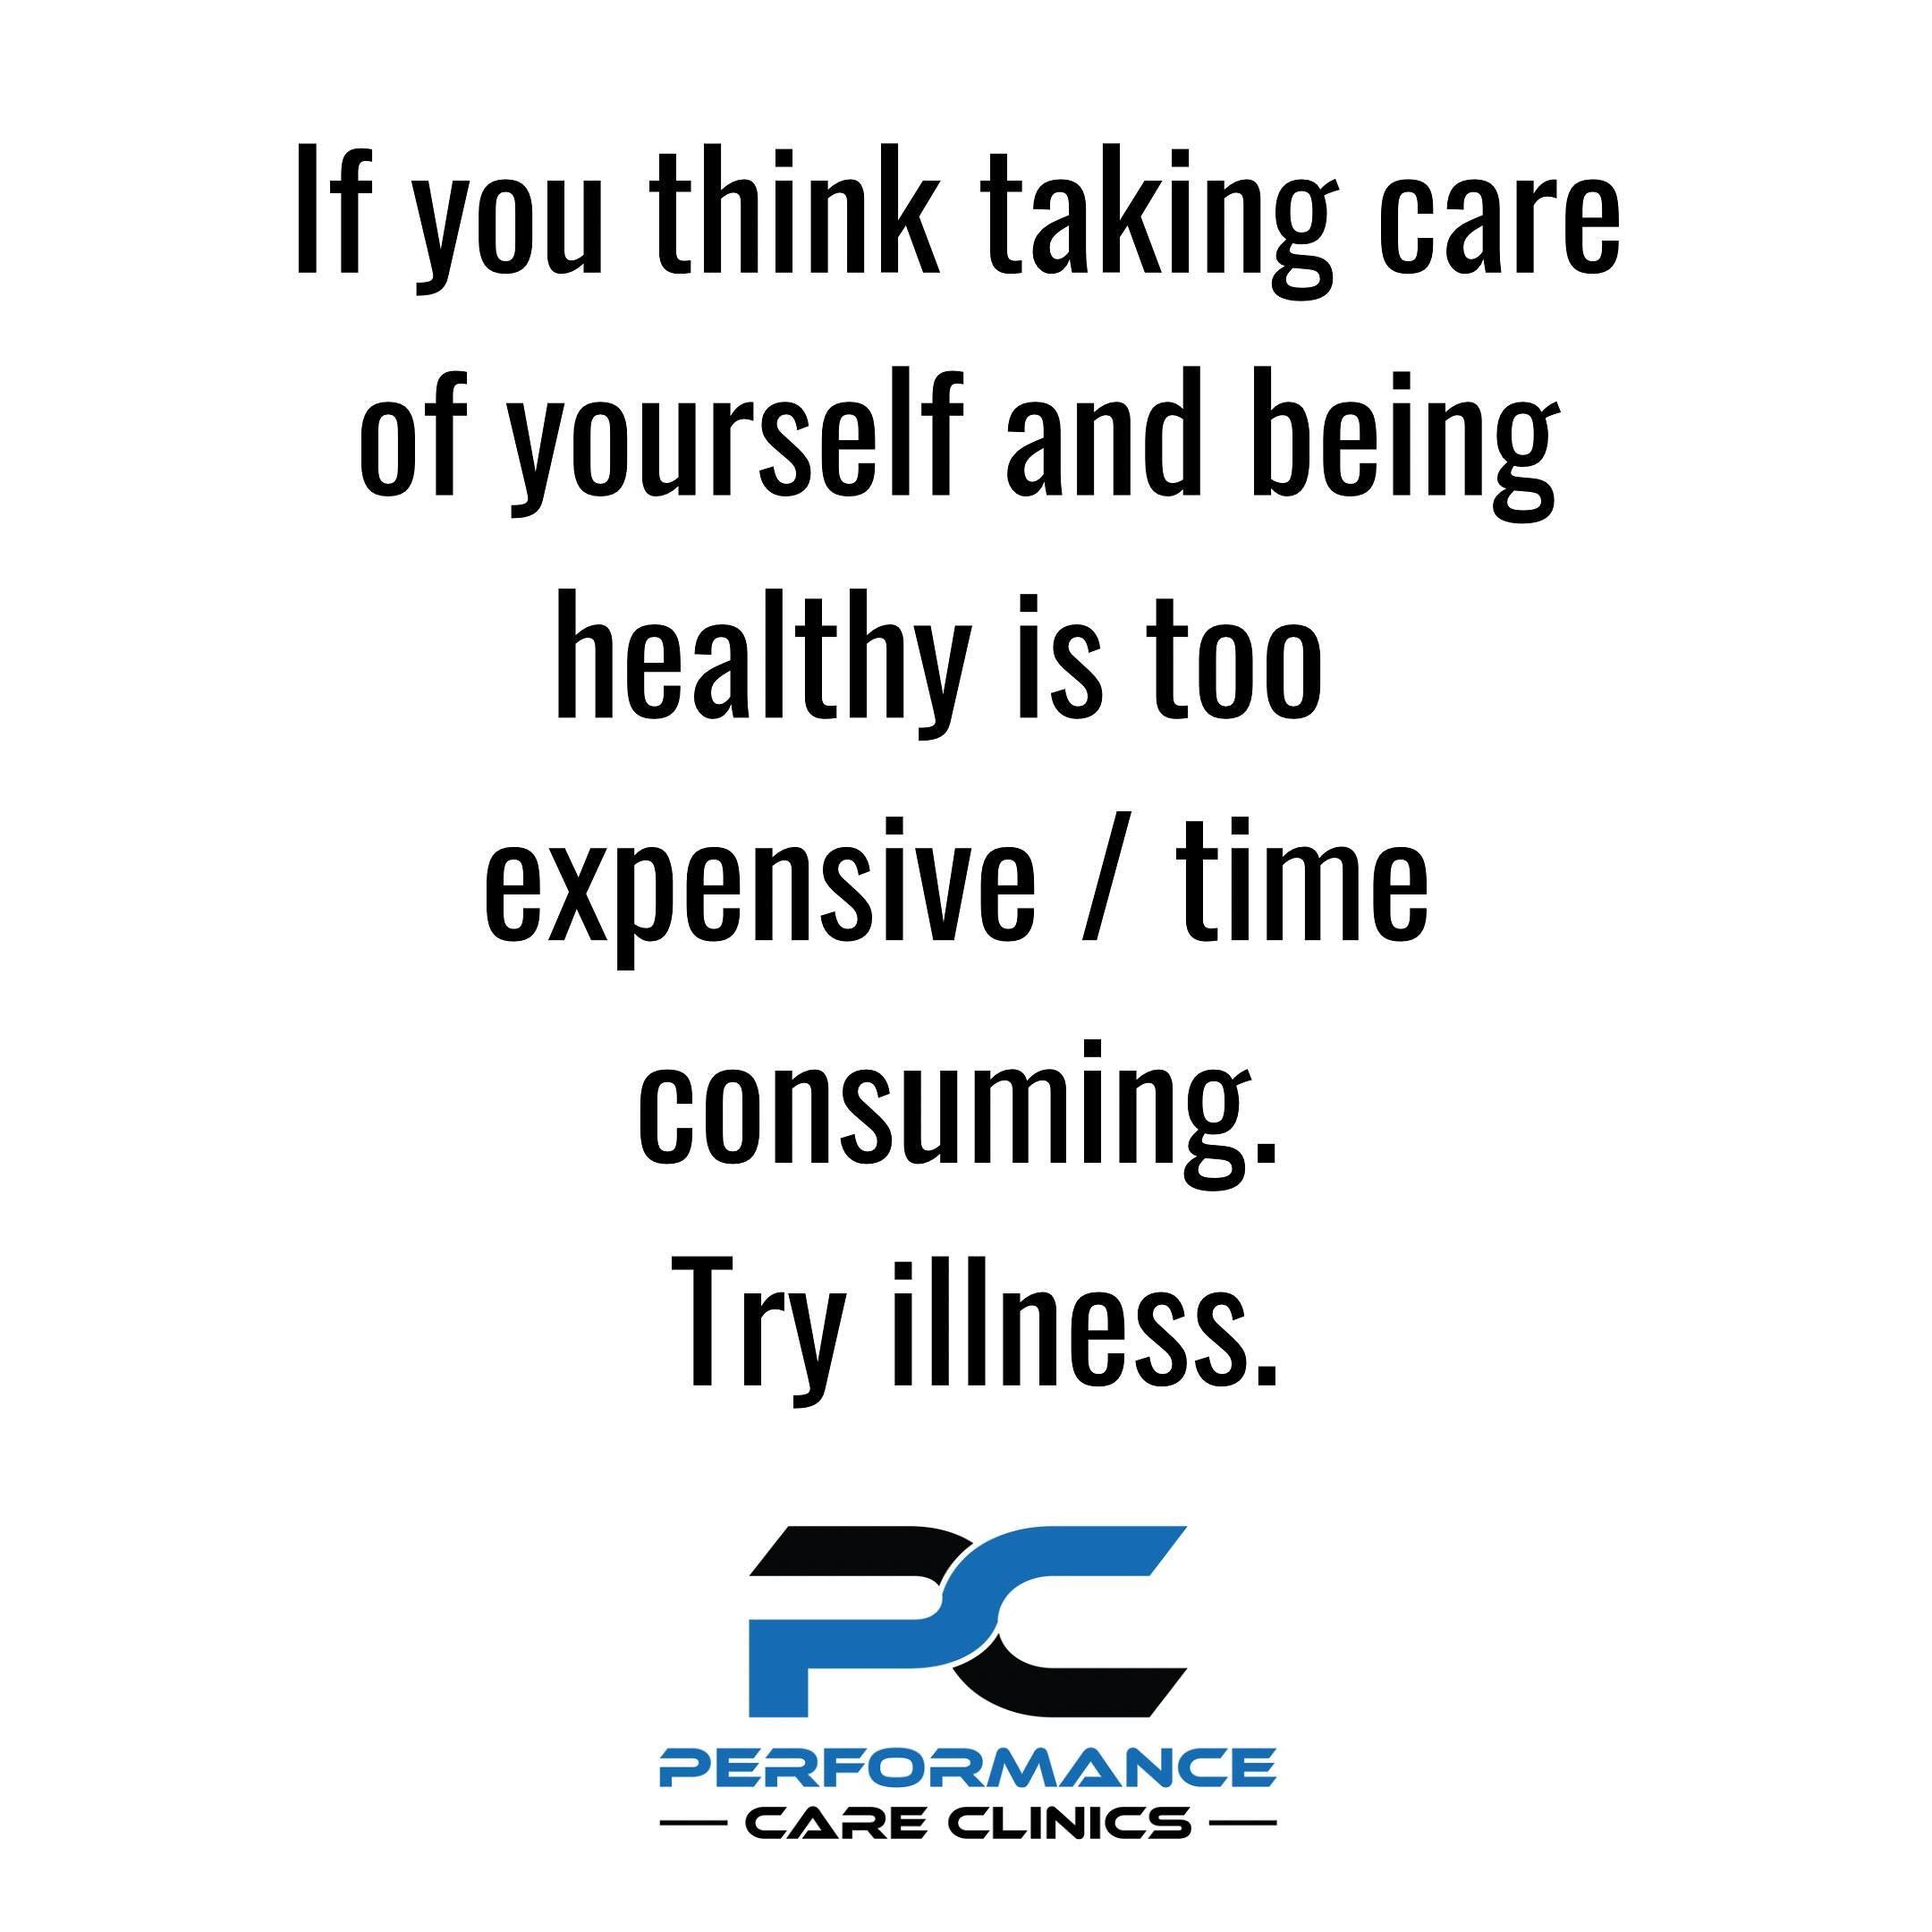 Health is wealth!

Not only does it rhyme, but it&rsquo;s true. The costs of investing in yourself will pay dividends in the future! Invest in yourself! 

If you have any pains or limitations and would like to come in to see a Doctor of Physical Ther